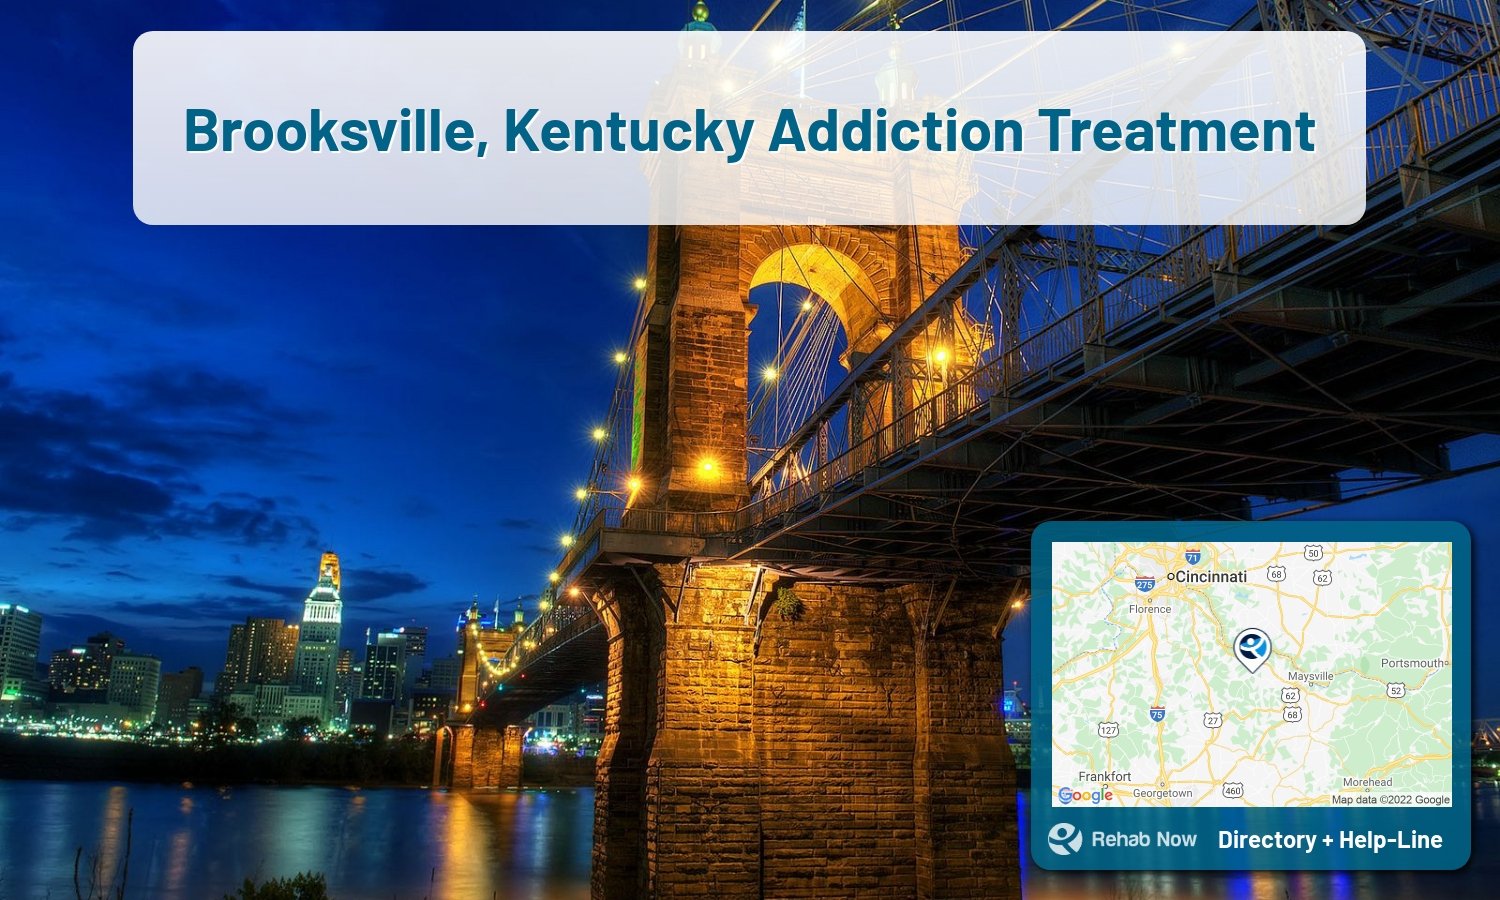 Brooksville, KY Treatment Centers. Find drug rehab in Brooksville, Kentucky, or detox and treatment programs. Get the right help now!